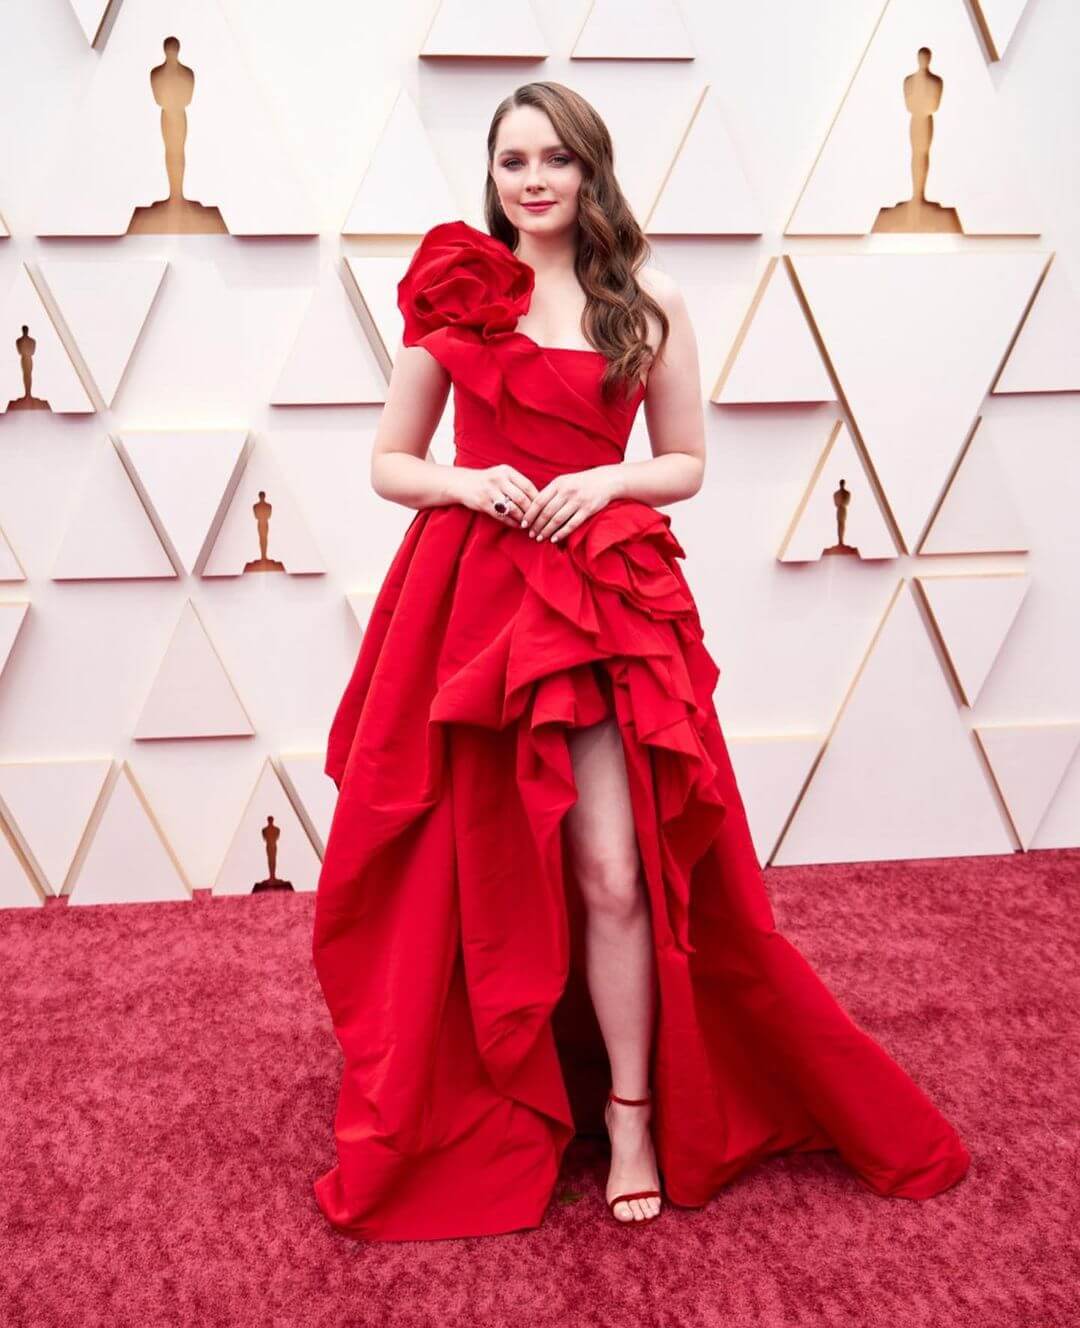 Fabulous Look In Adorable Red Dress